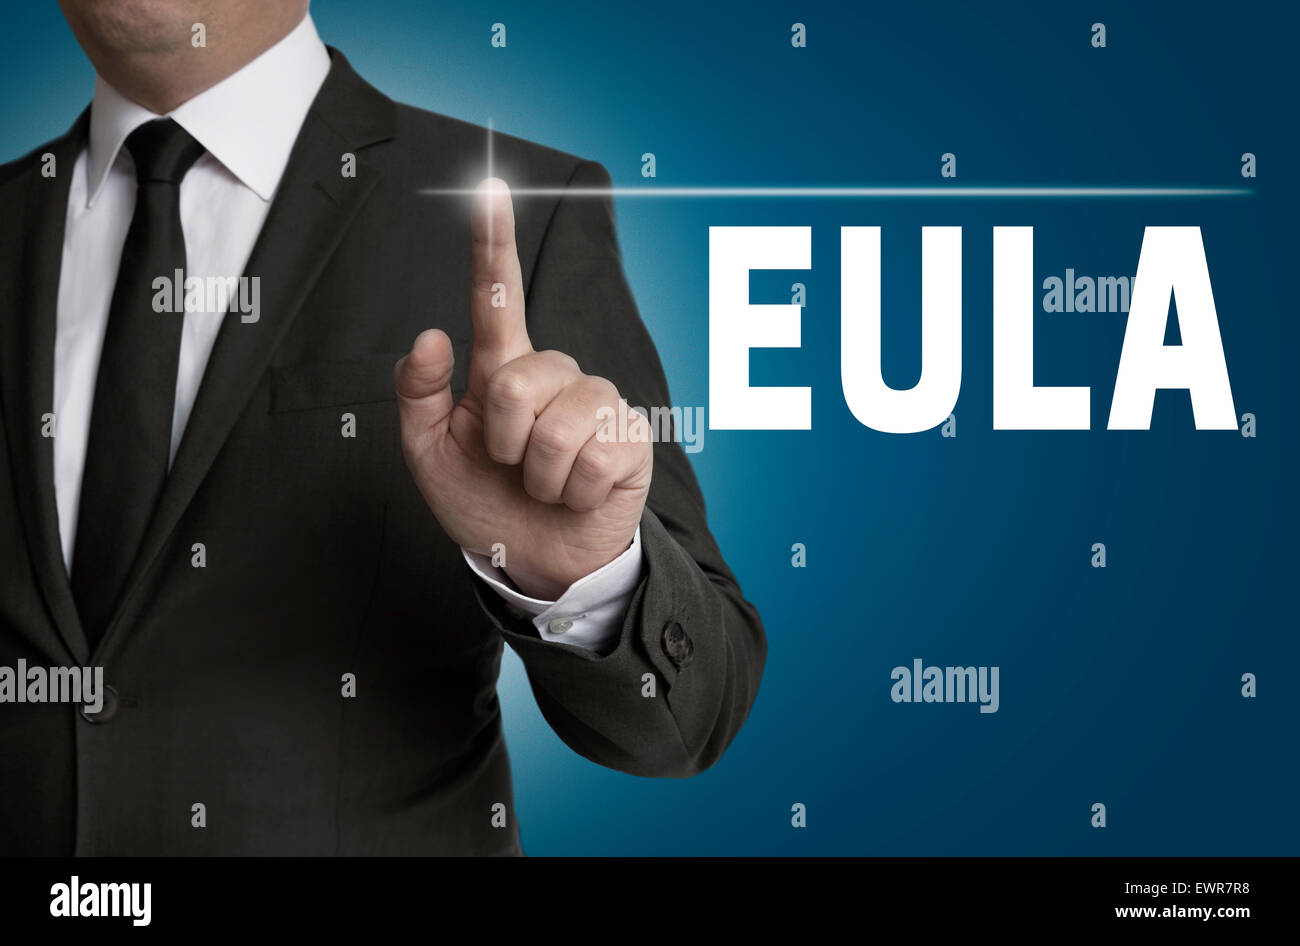 Eula touchscreen is operated by businessman. Stock Photo